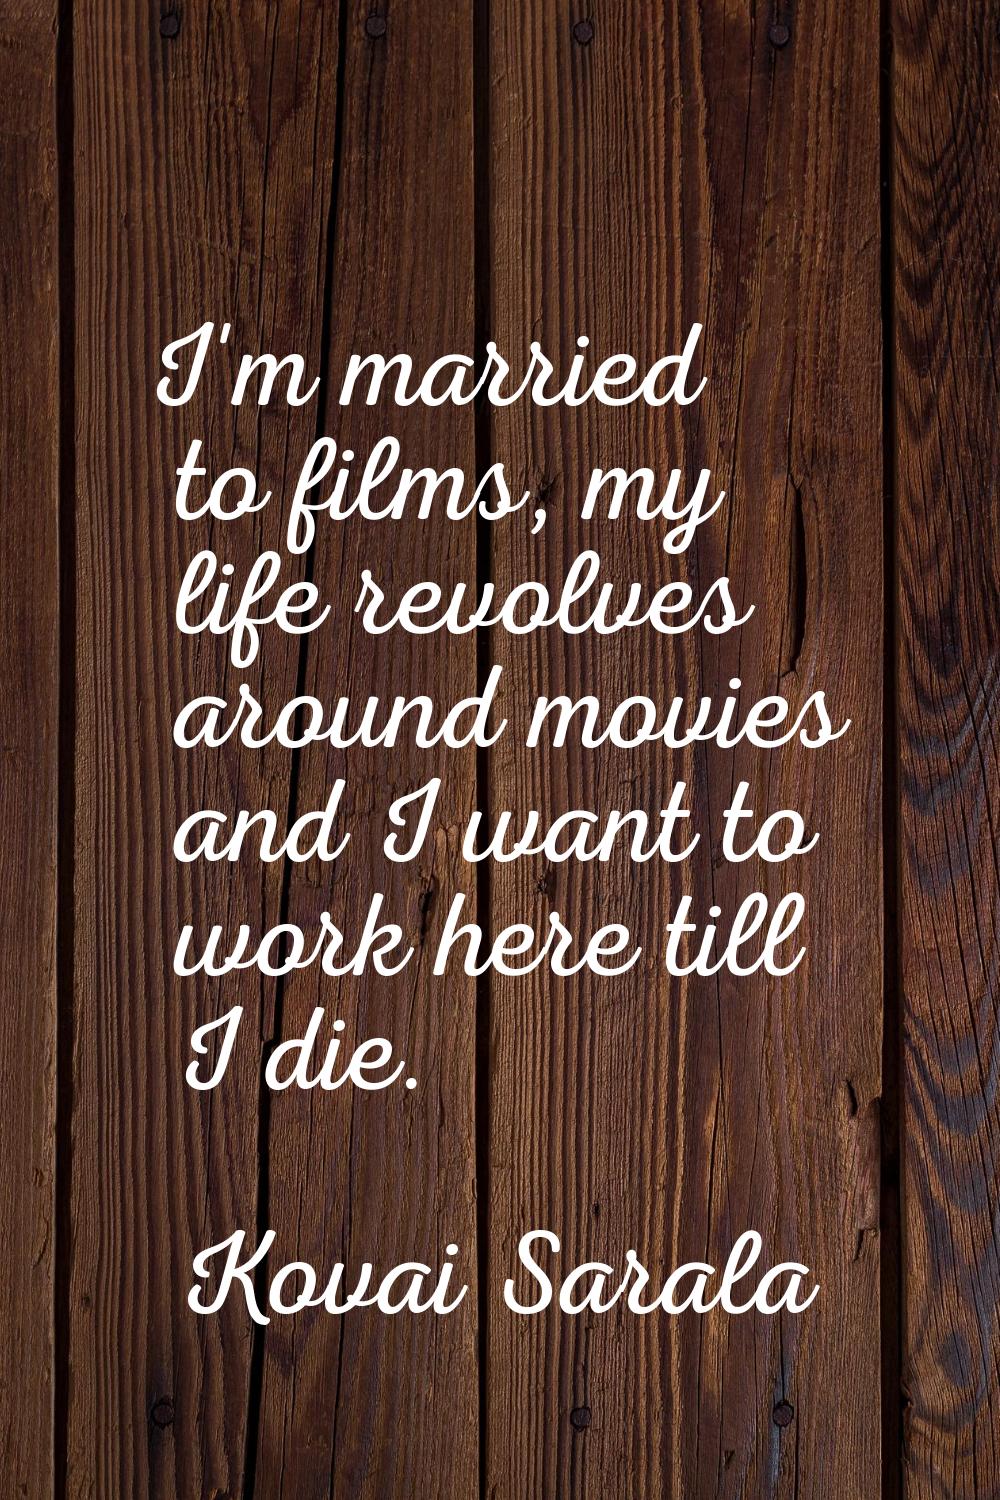 I'm married to films, my life revolves around movies and I want to work here till I die.